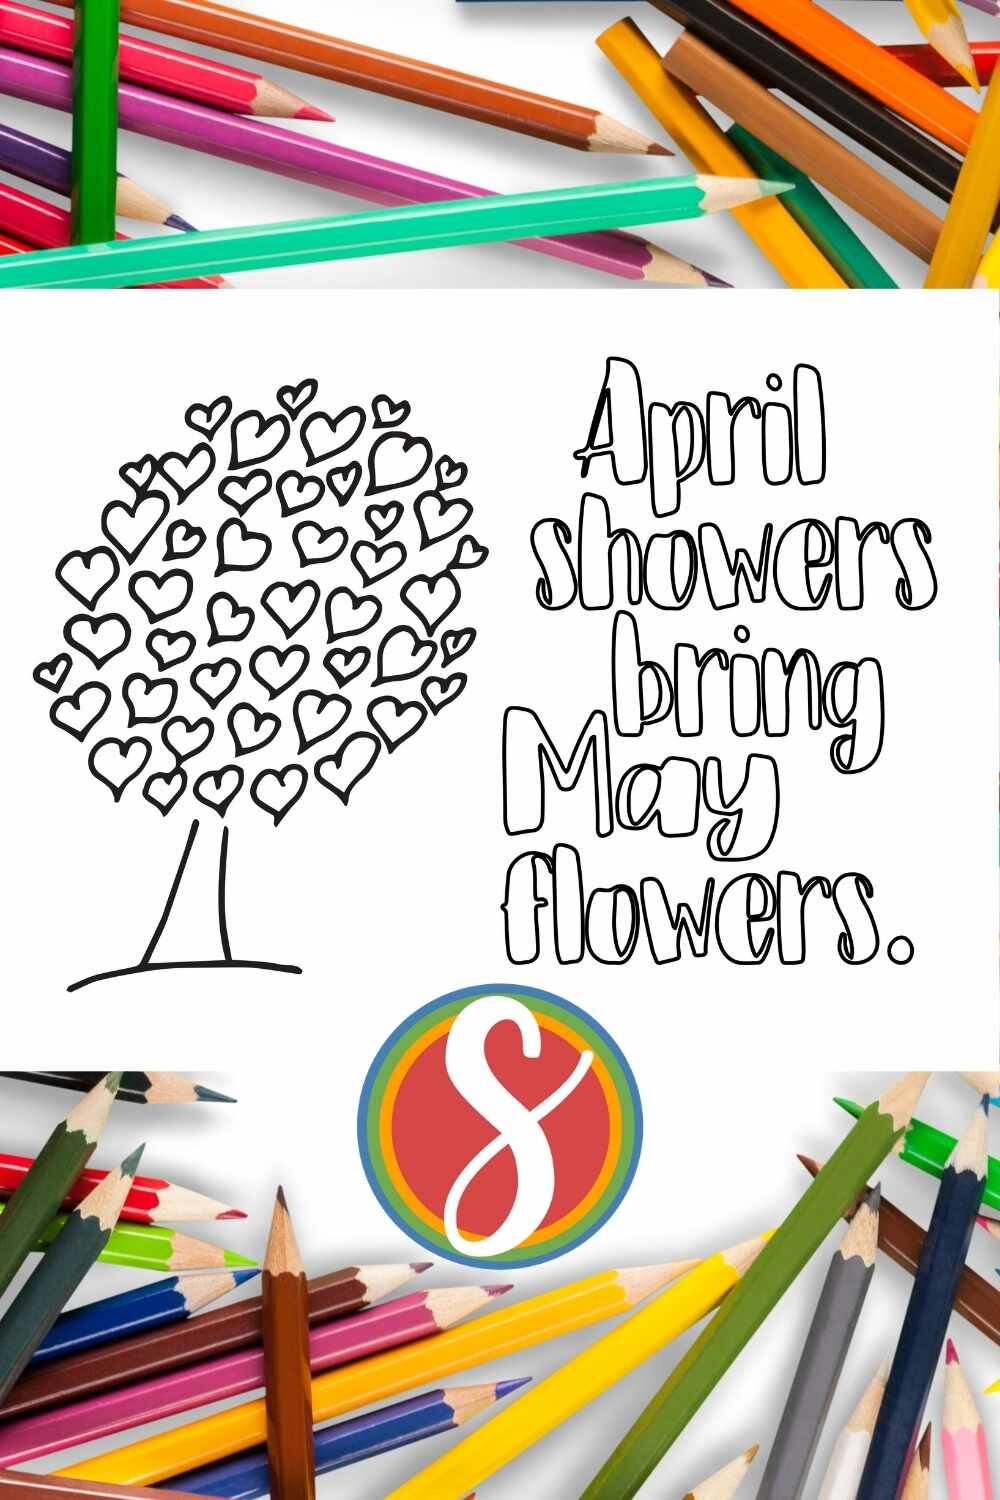 Free! Printable “April showers bring May flowers” coloring pages from Stevie Doodles